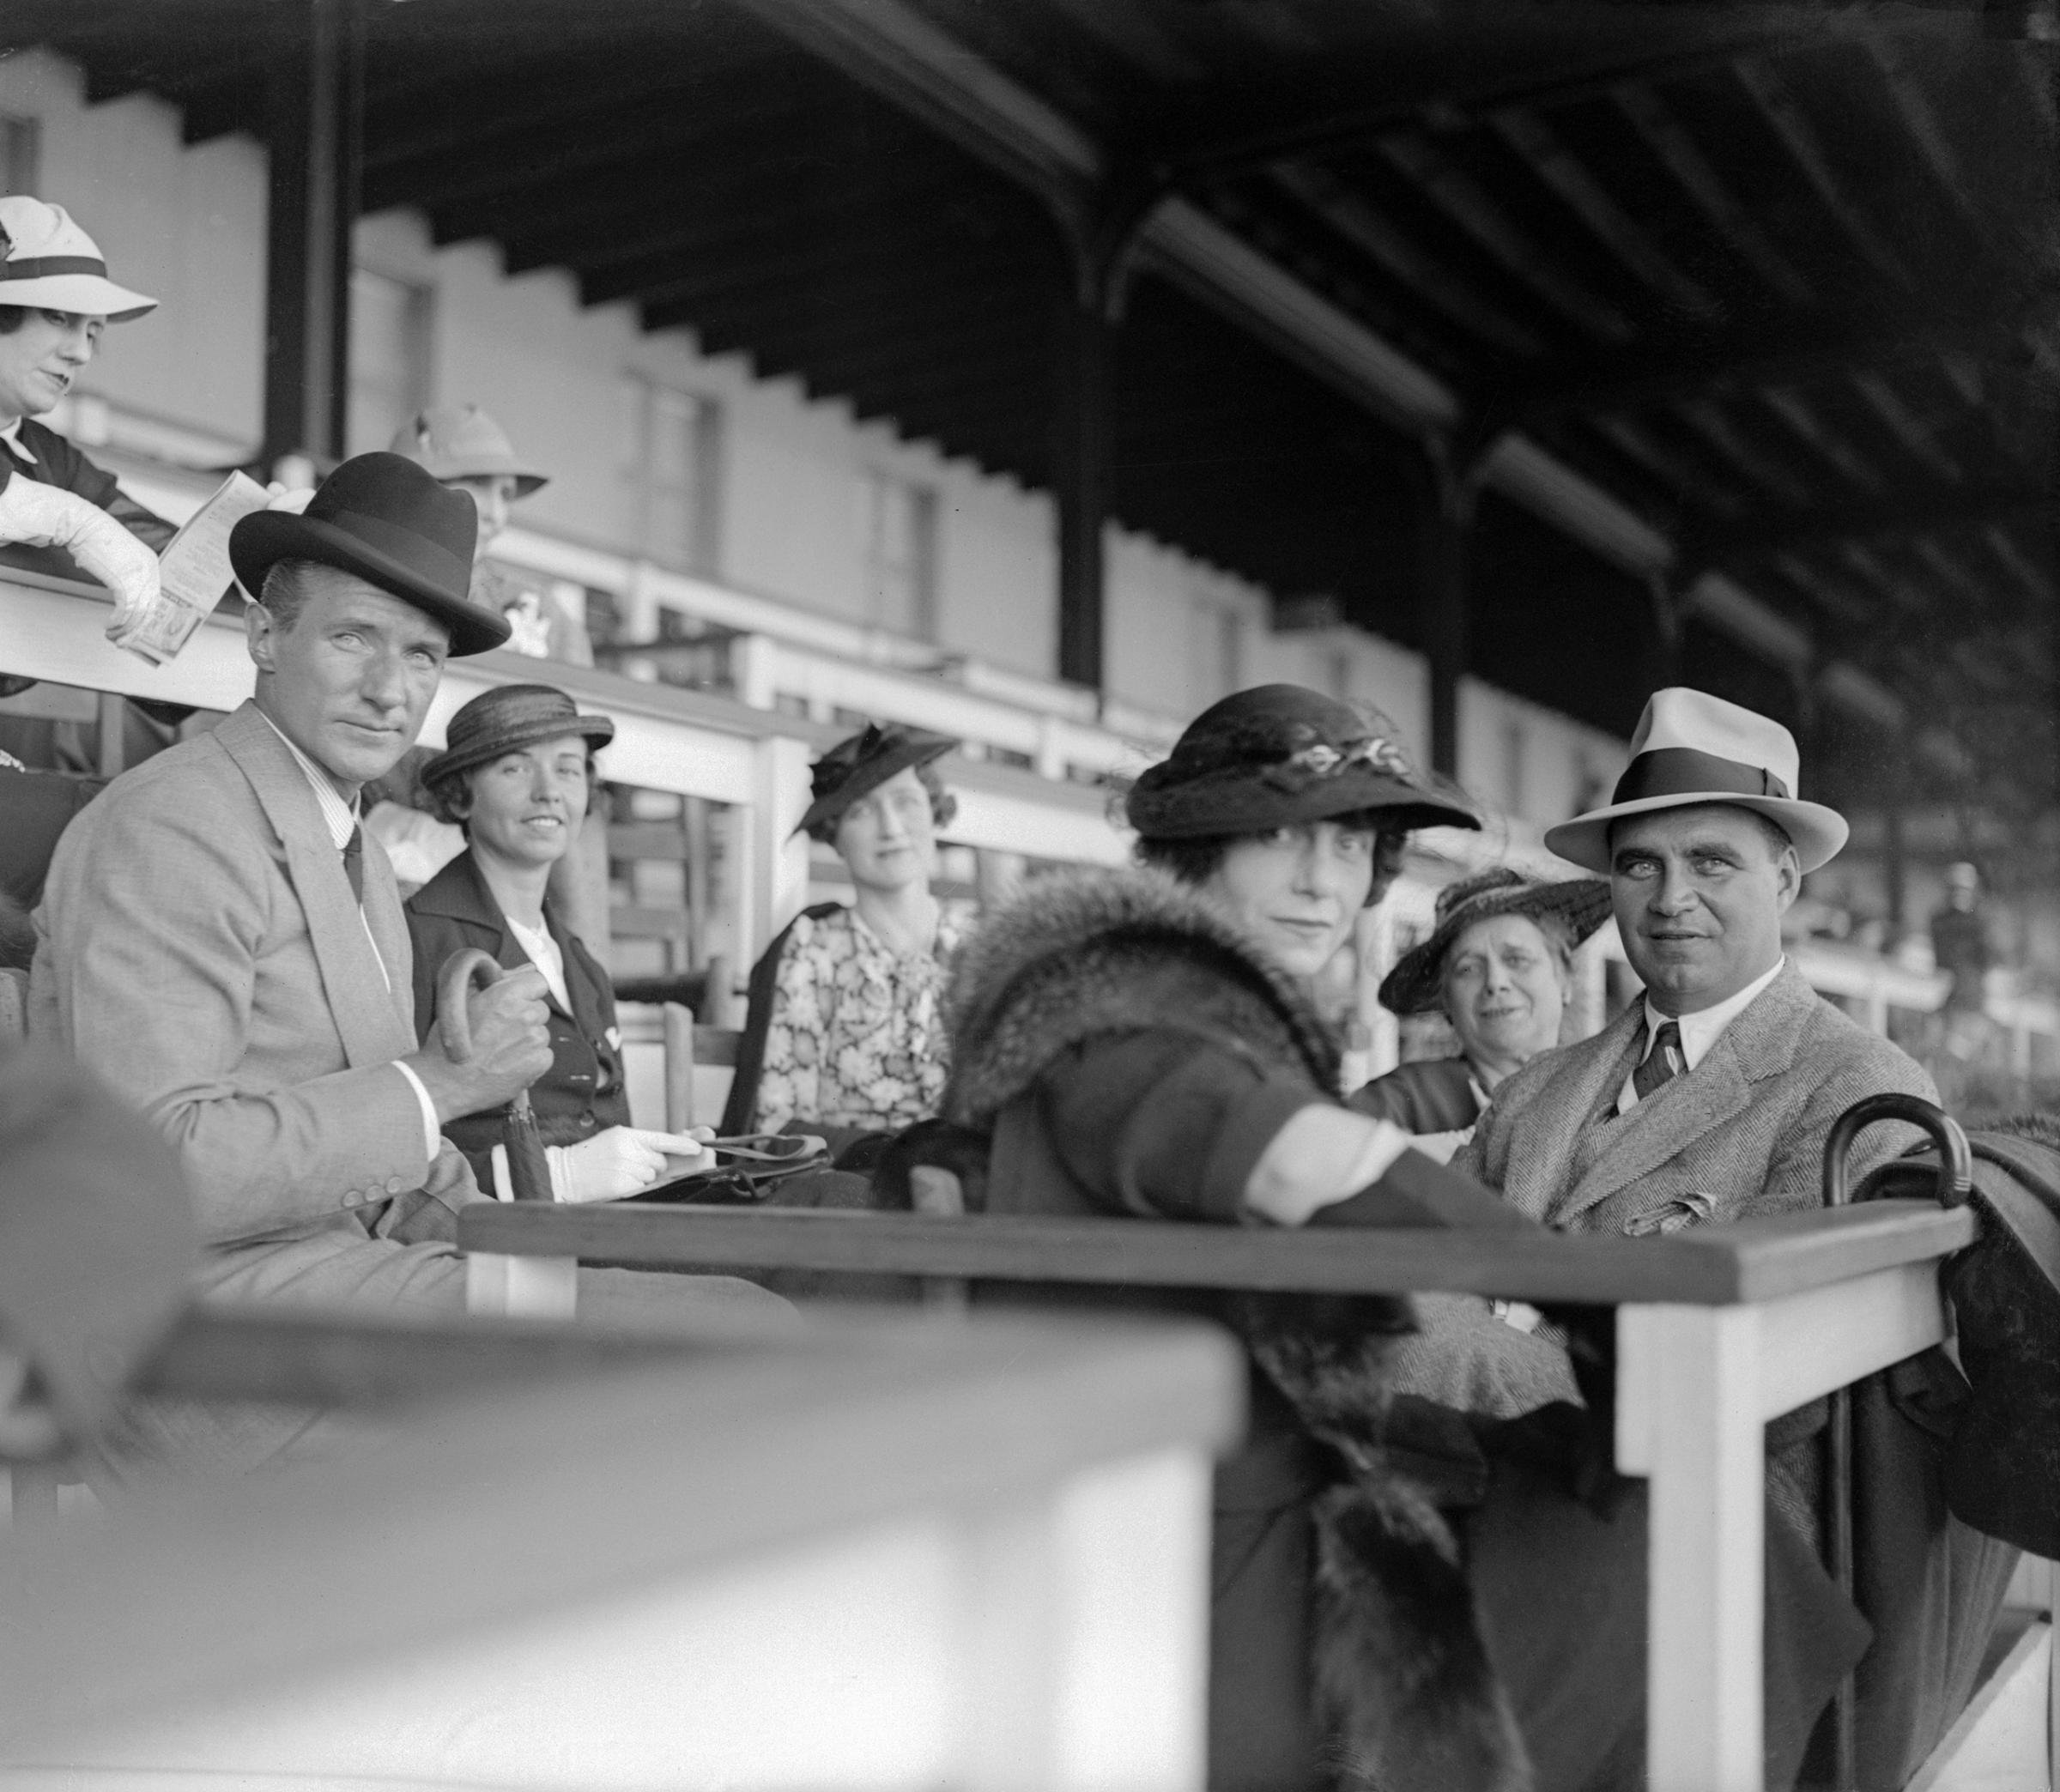 Crowds on hand the day before Kentucky Derby running at Churchill Downs, Louisville, Kentucky, 1935.